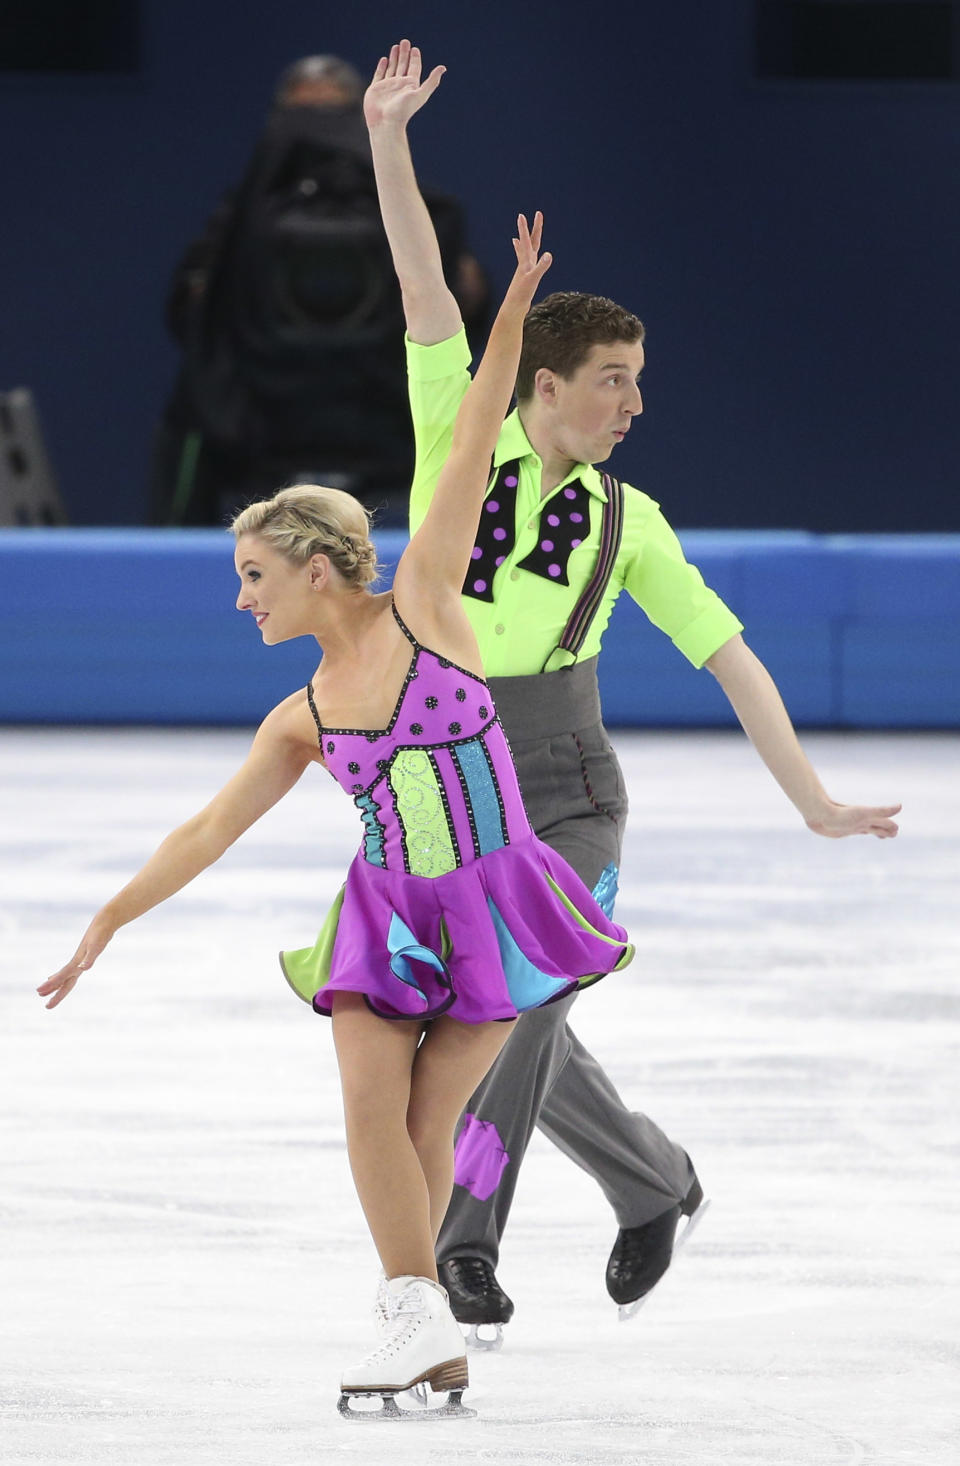 <p>The Australian pair also went the colorful route, but chose neon colors instead of pastel.And they didn’t just stop with blocks of bright purple, green and blue. They also added polka dots to her top and his bow tie as well. </p>